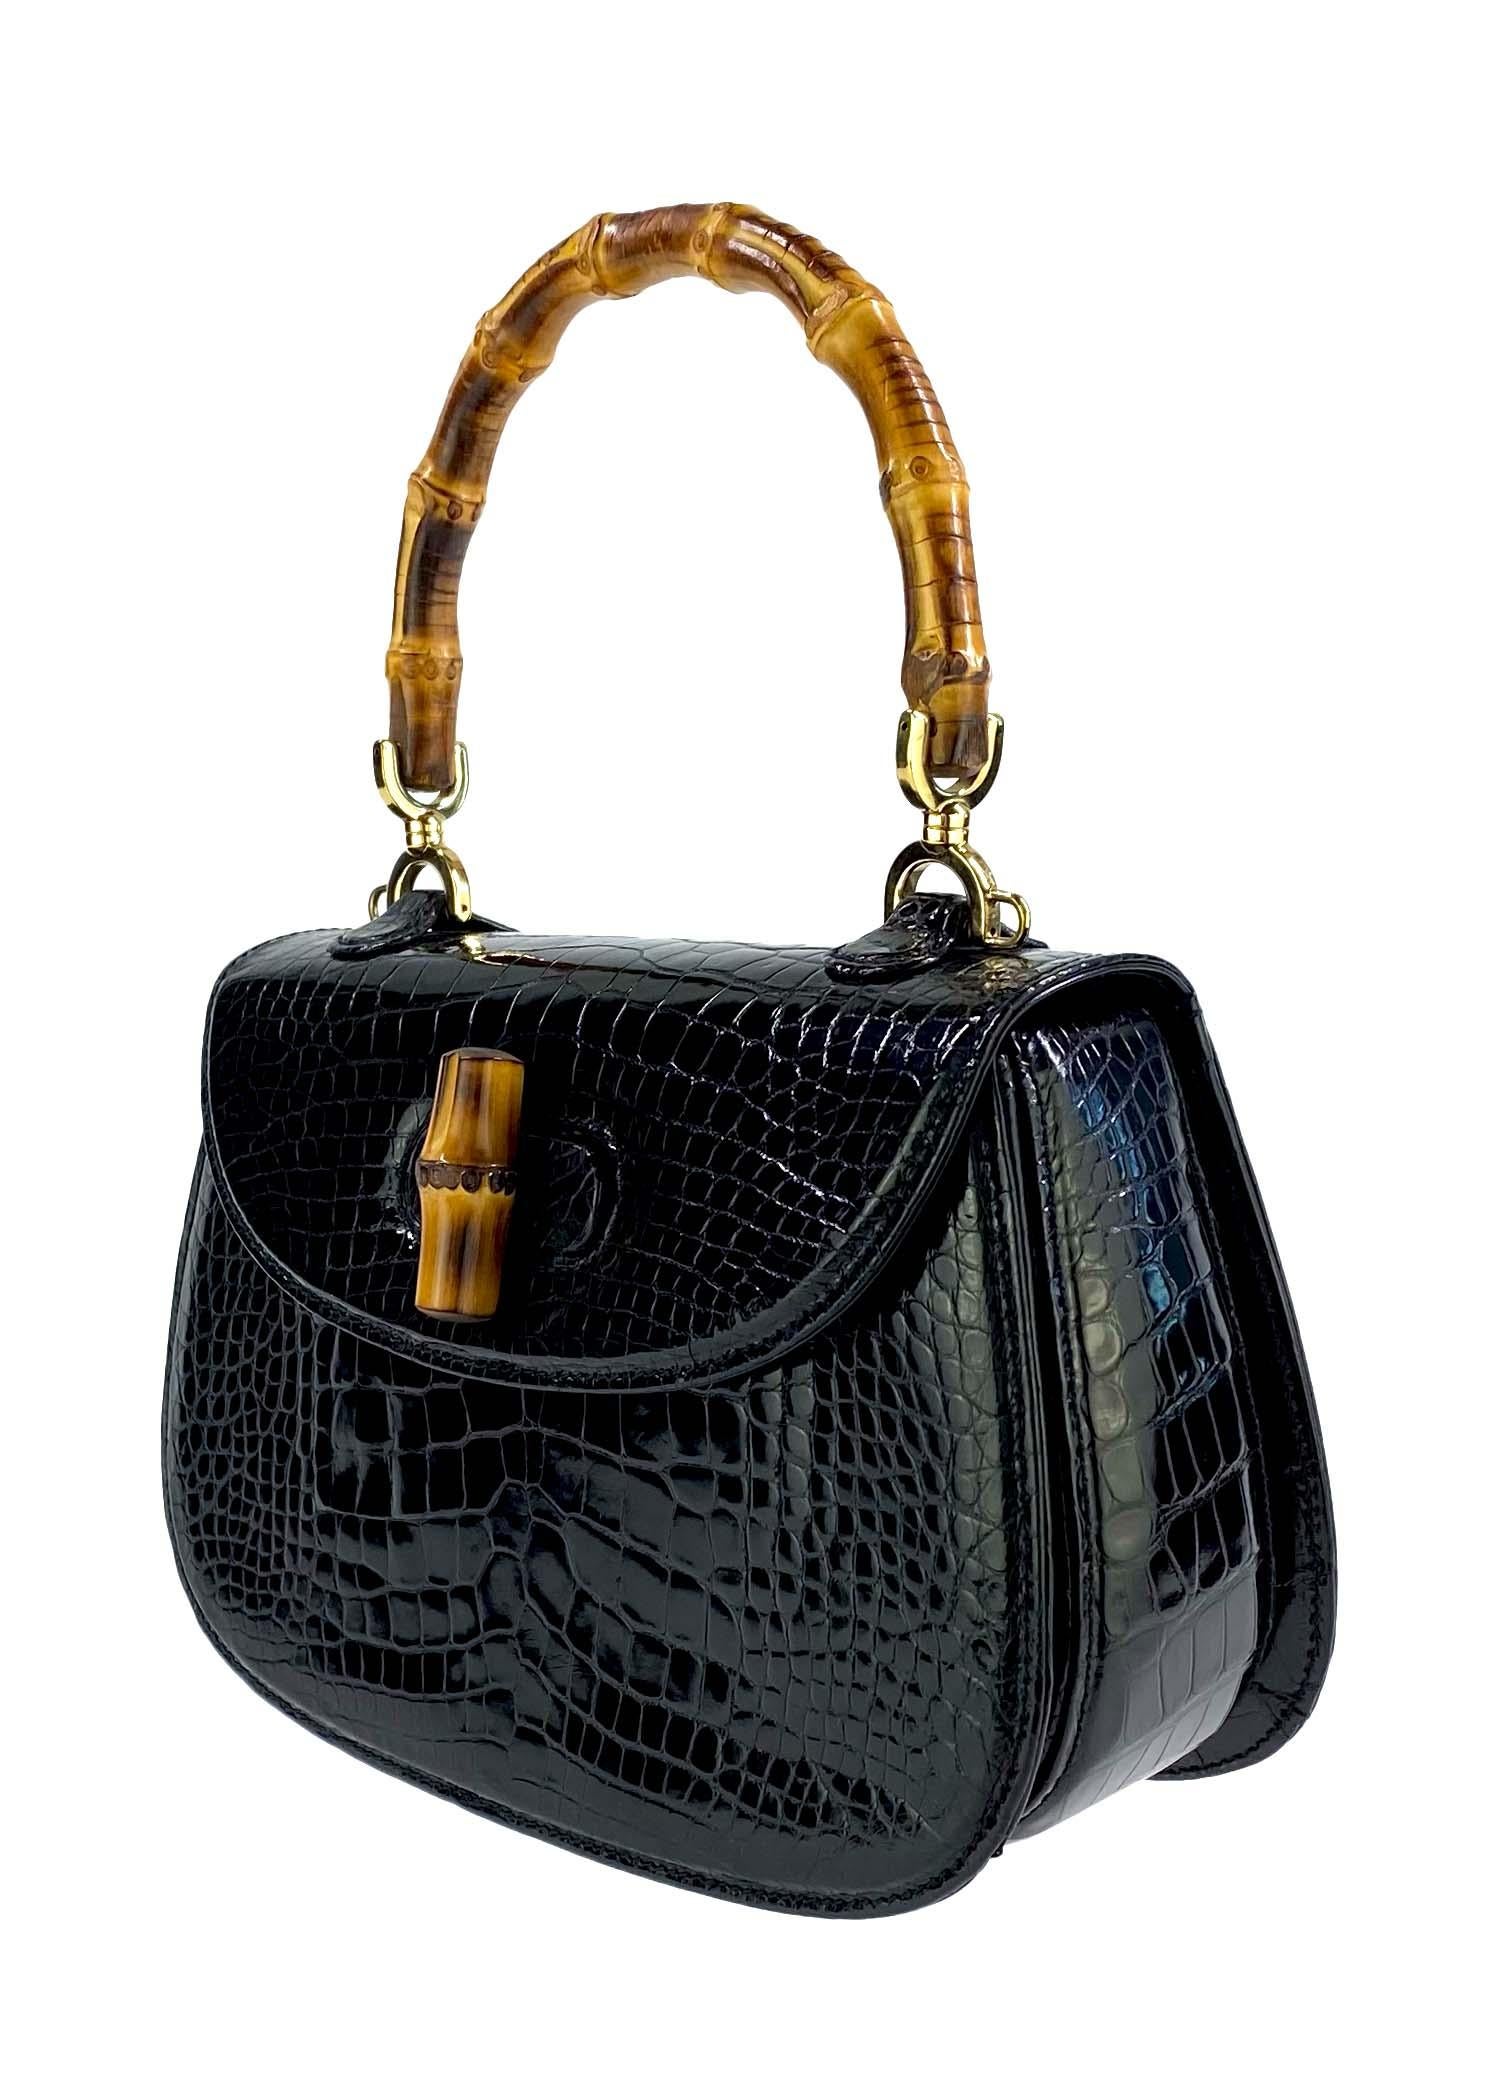 S/S 1991 Gucci Small Mini Crossbody Black Alligator Bamboo Top Handle Bag In Excellent Condition In West Hollywood, CA